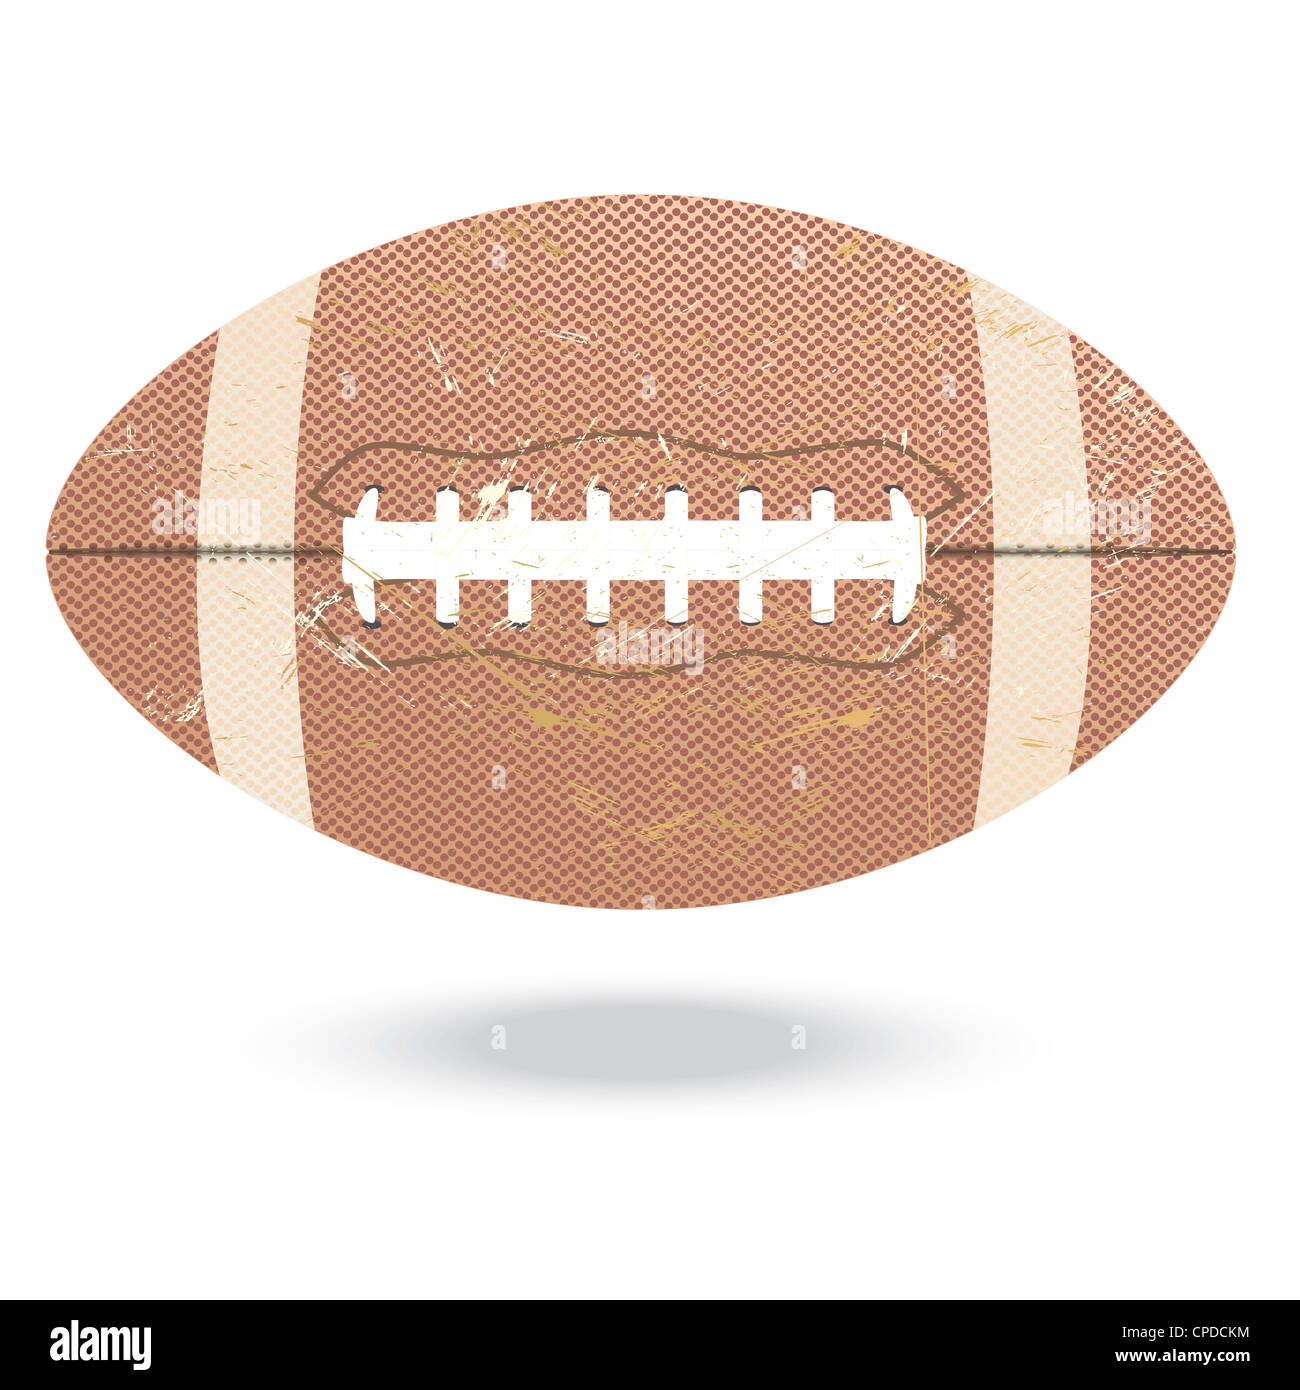 illustration of highly rendered vintage football, isolated in white background. Stock Photo